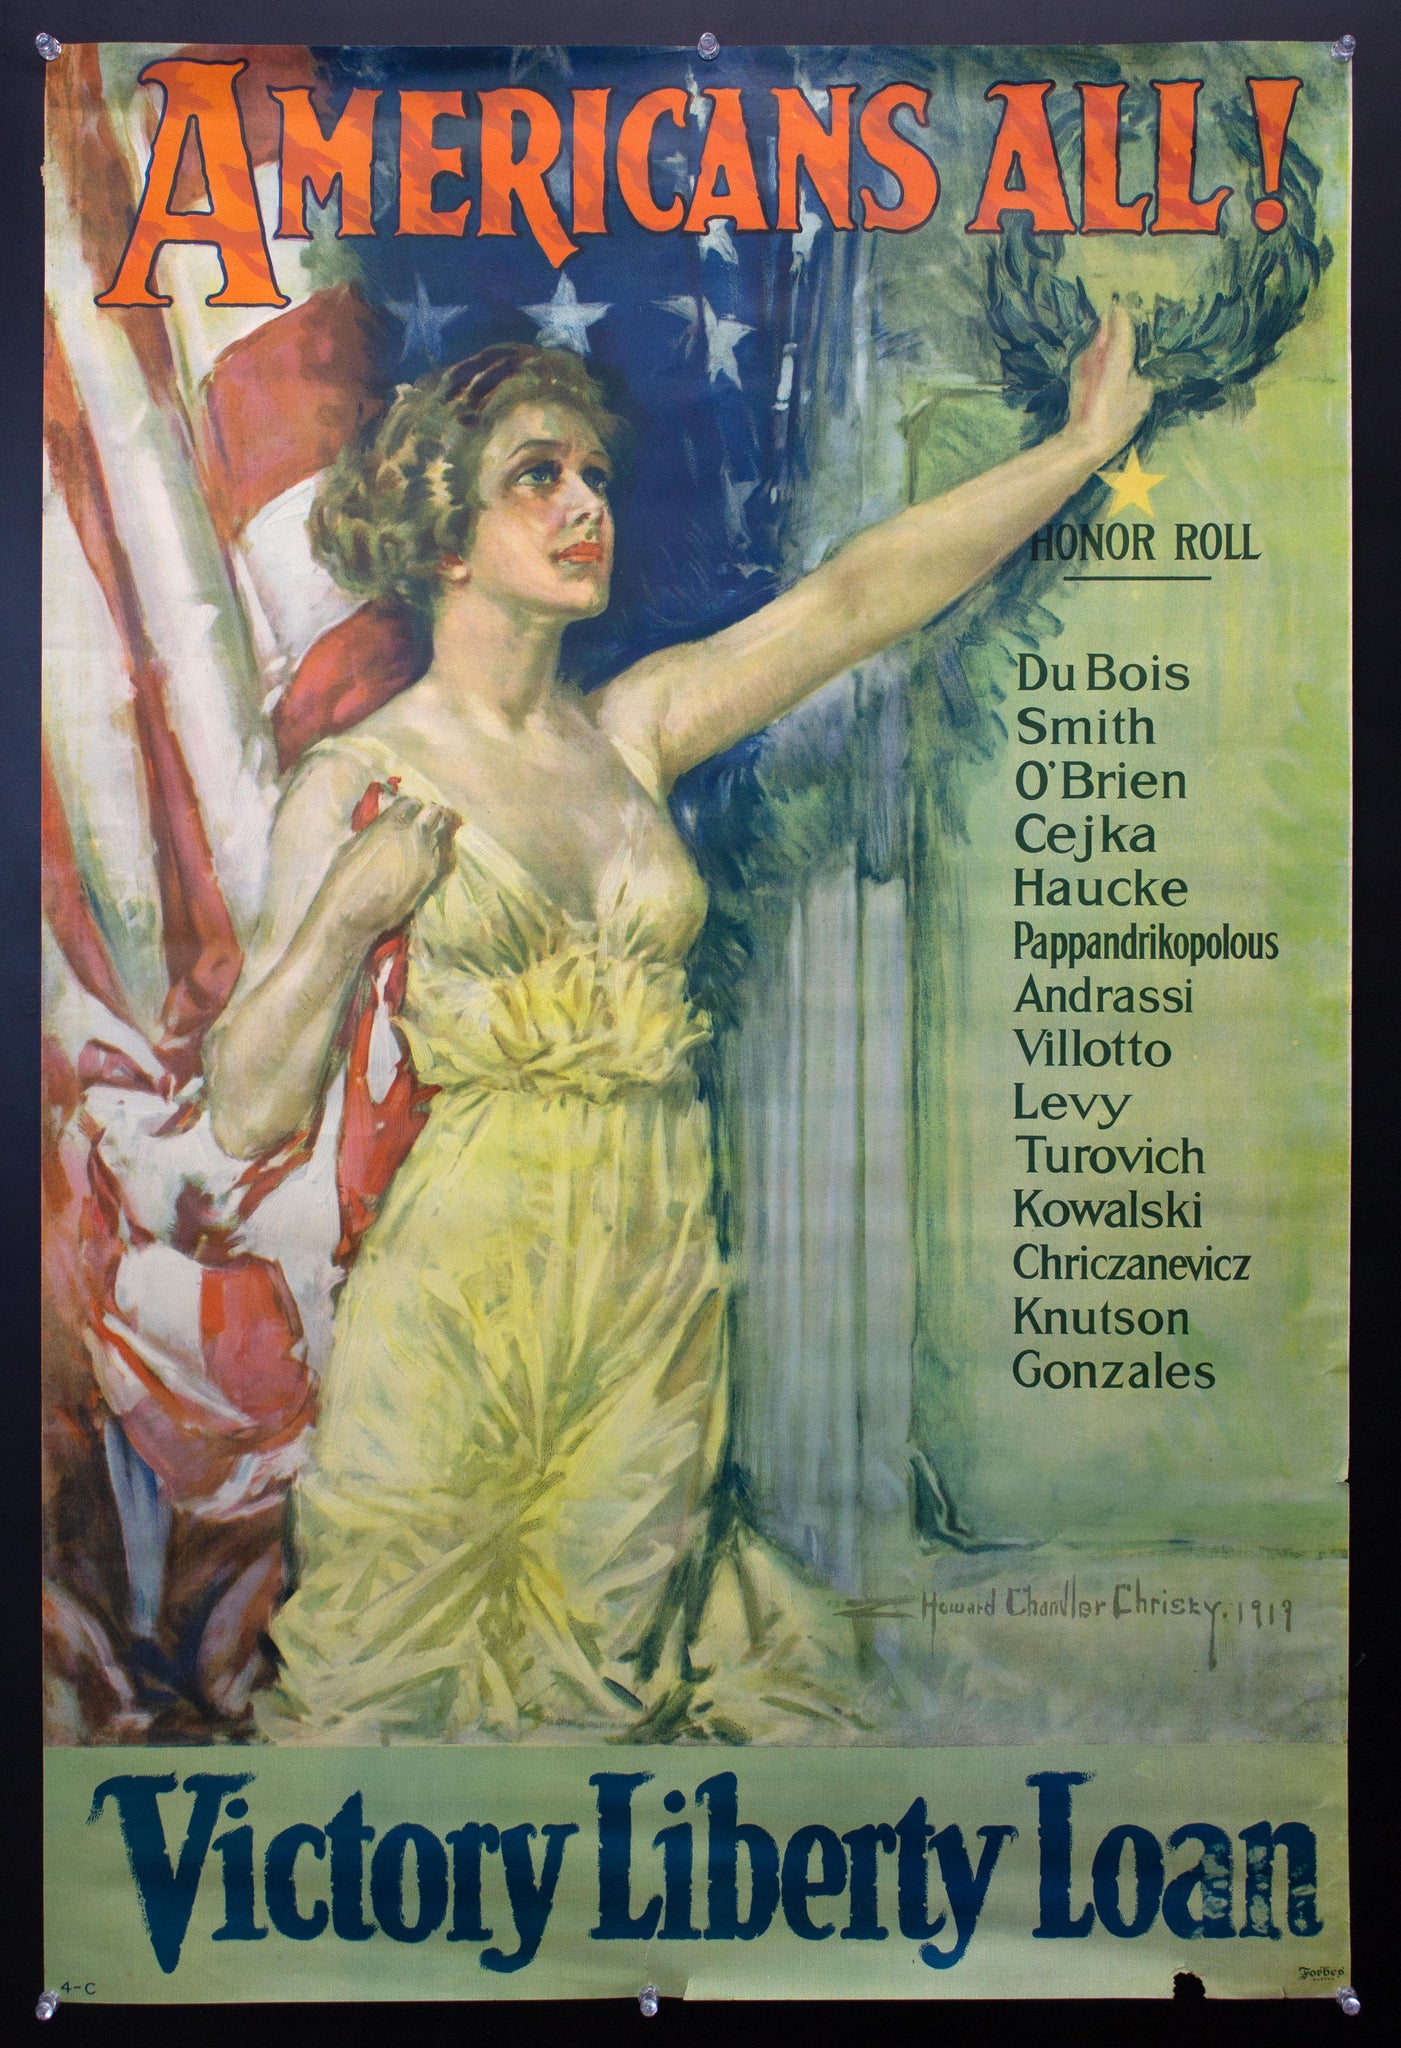 1919 Americans All Victory Liberty Loan by Howard Chandler Christy WWI